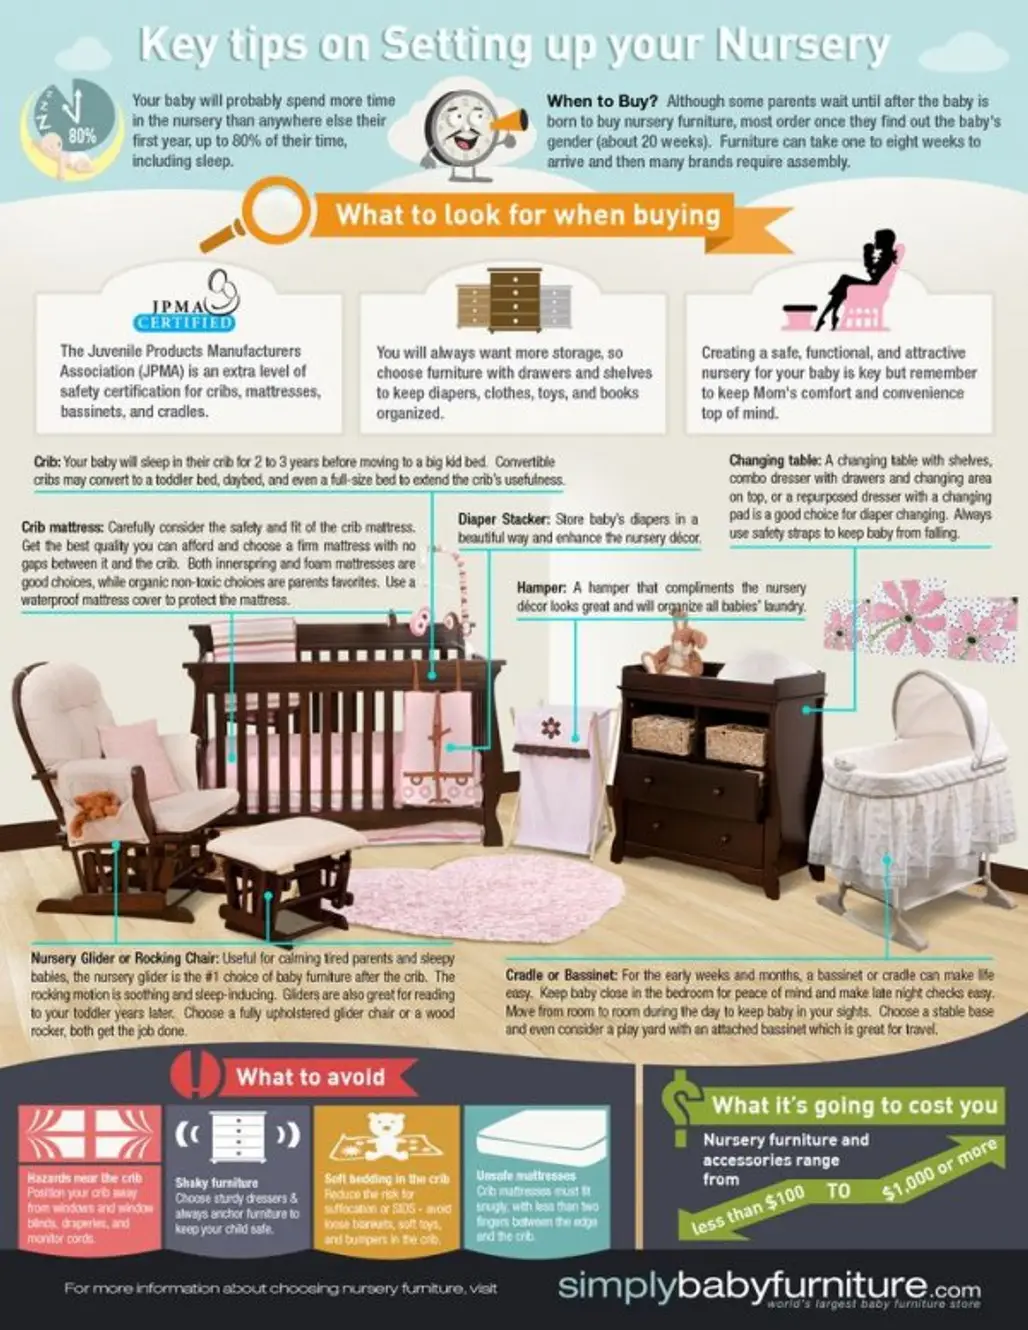 Tips on Setting up Your Nursery